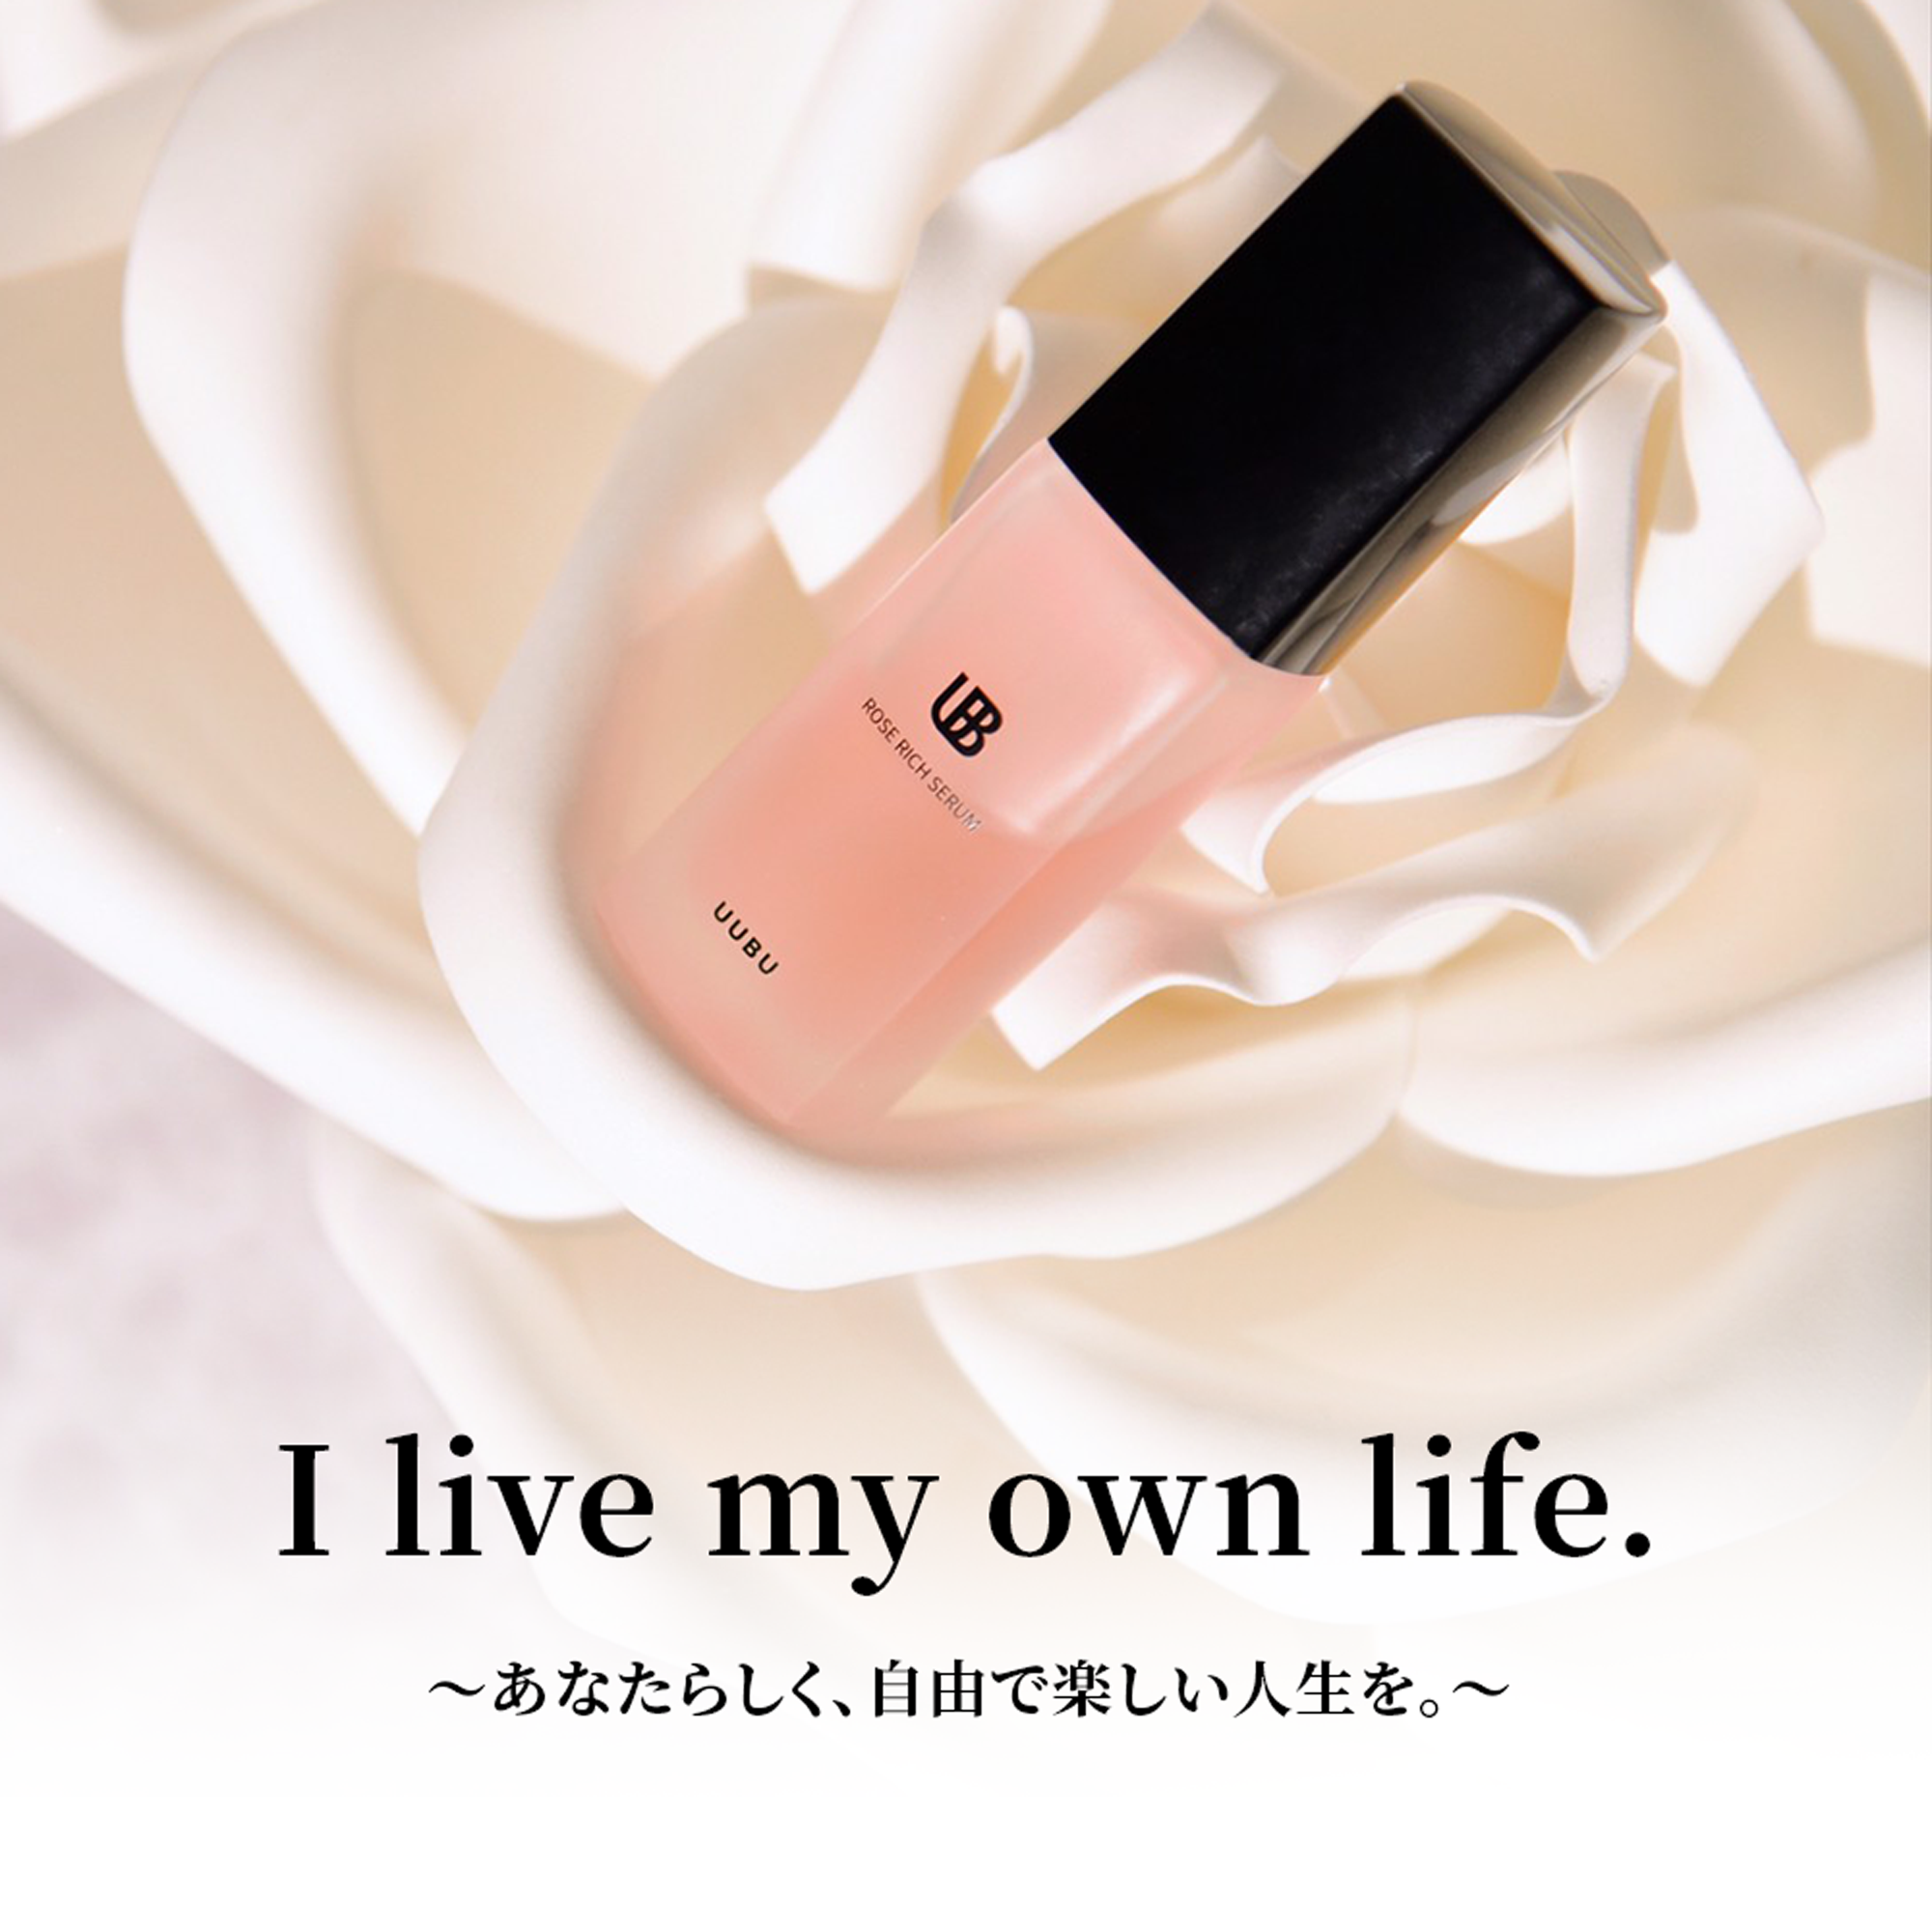 【Story】I live my own life.~あなたらしく、自由で楽しい人生を。~